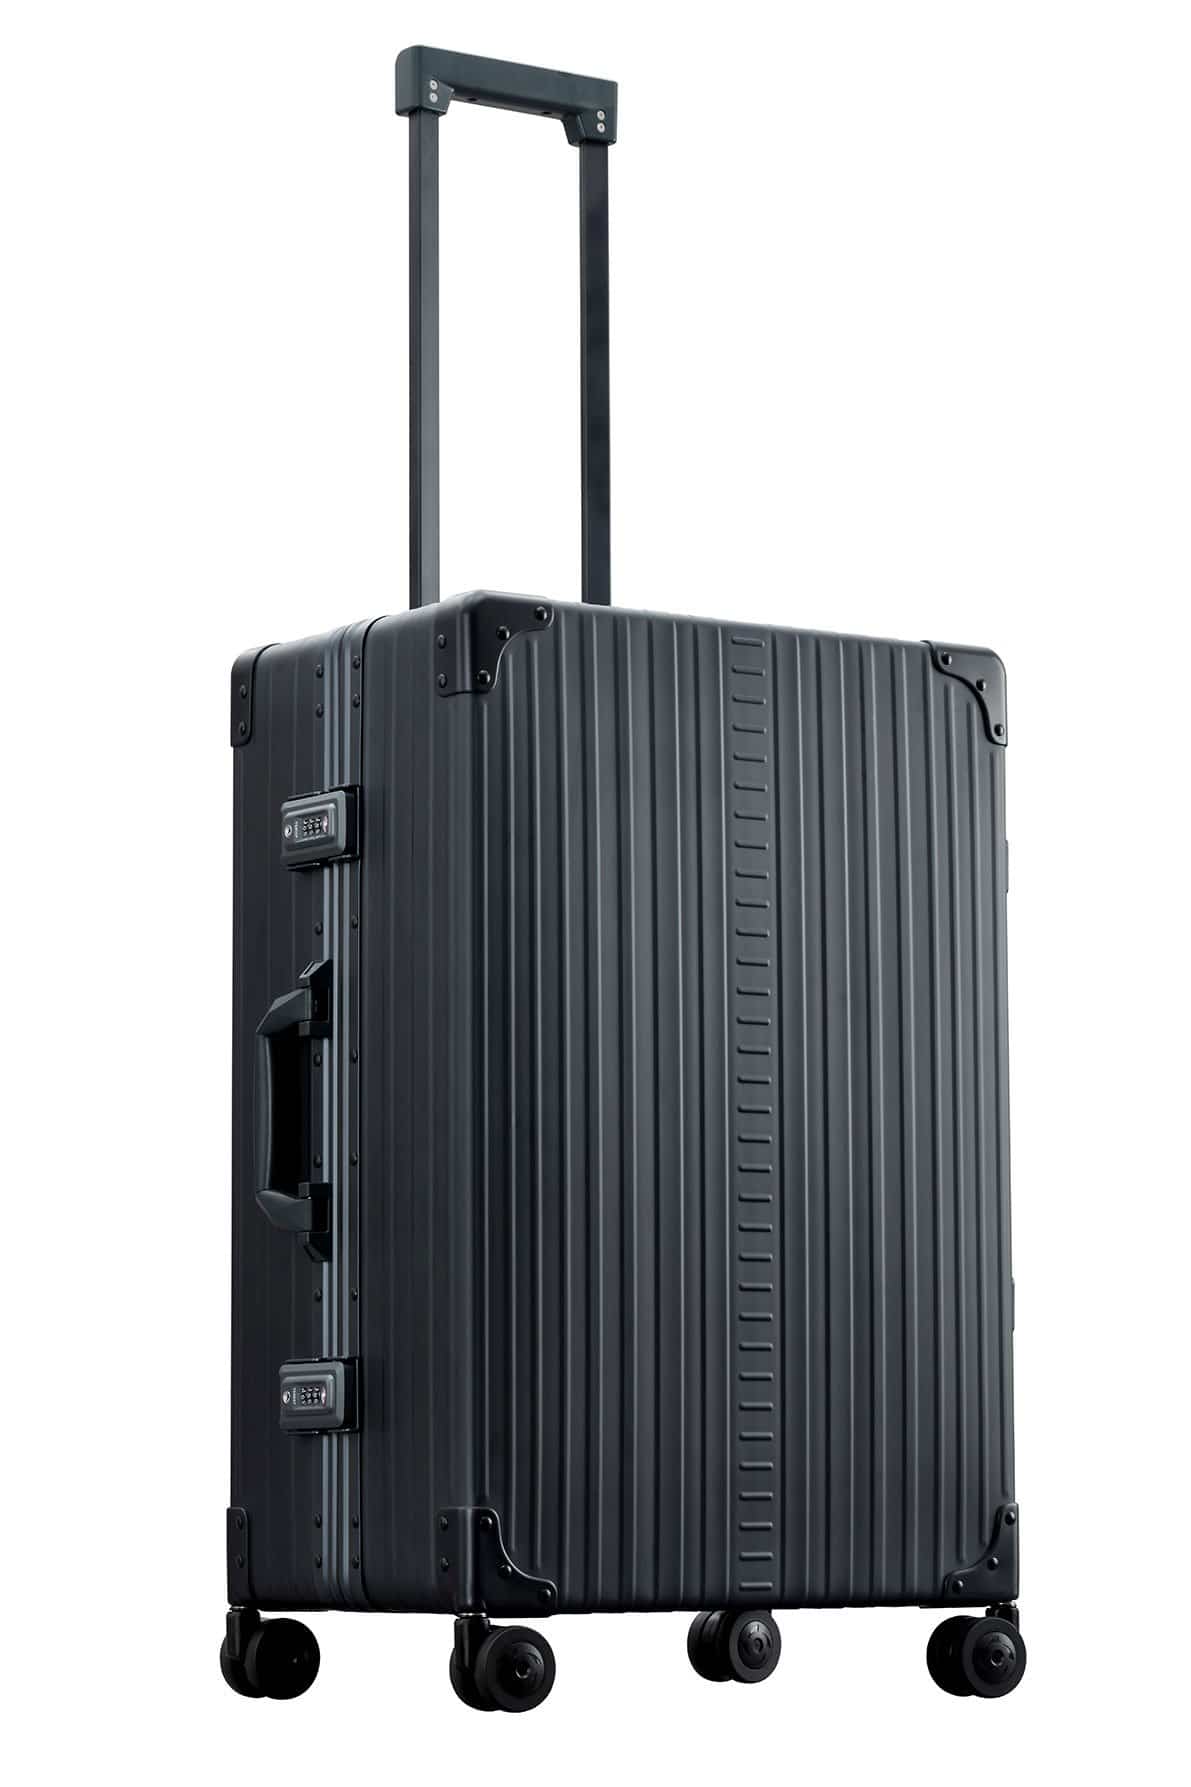 26 inch aluminum checked suitcase with wheels in black